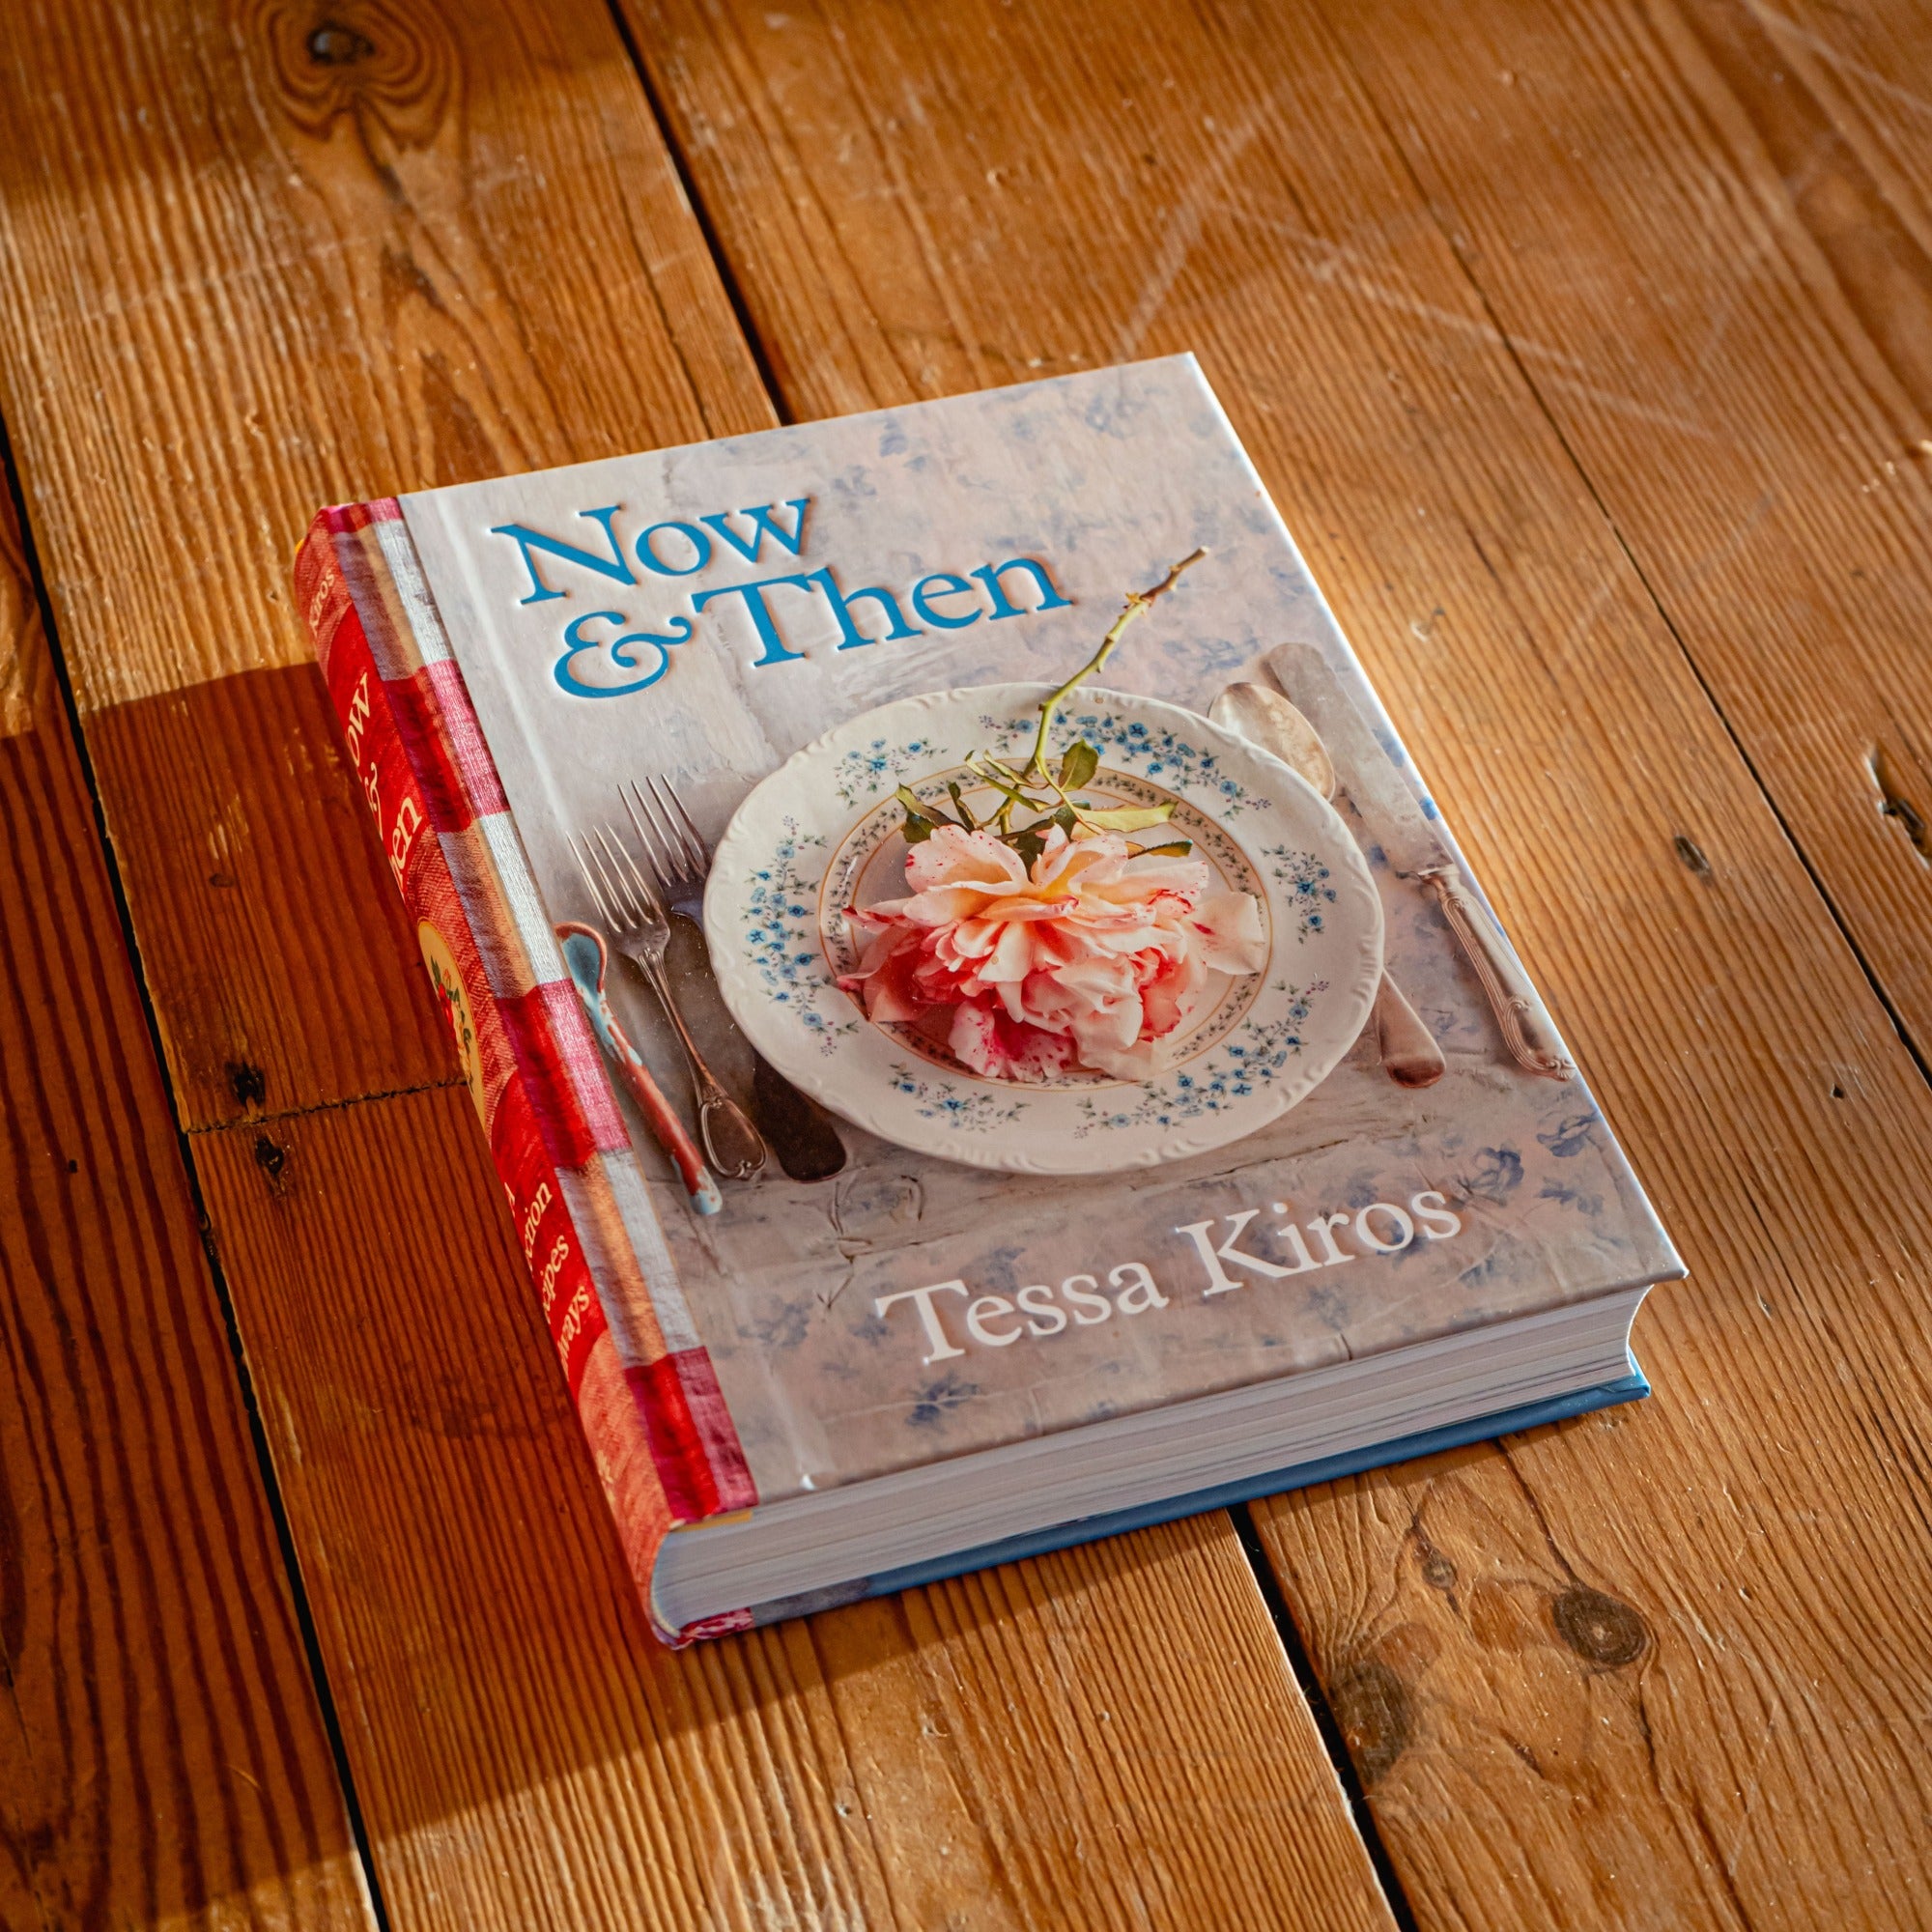 Now and Then: A Collection Of Recipes For Always